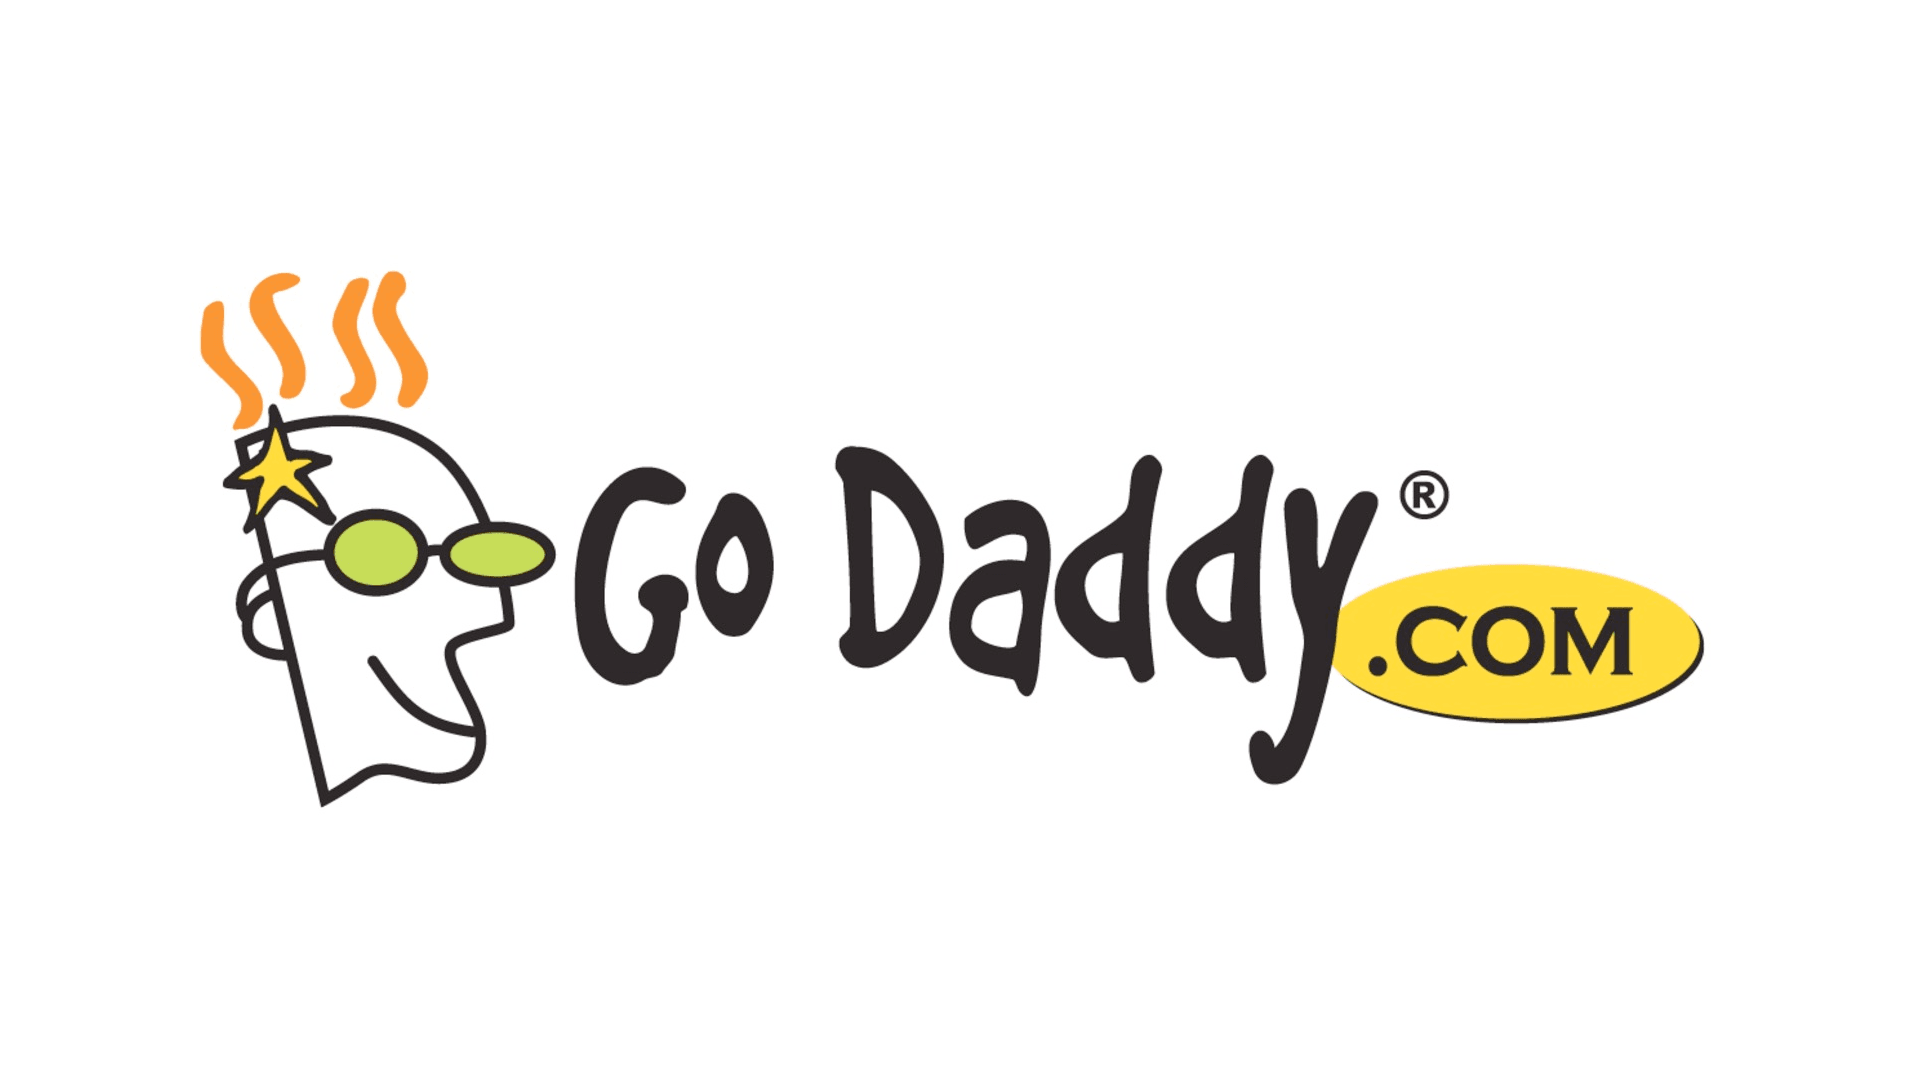 GoDaddy Domain and Hosting Service